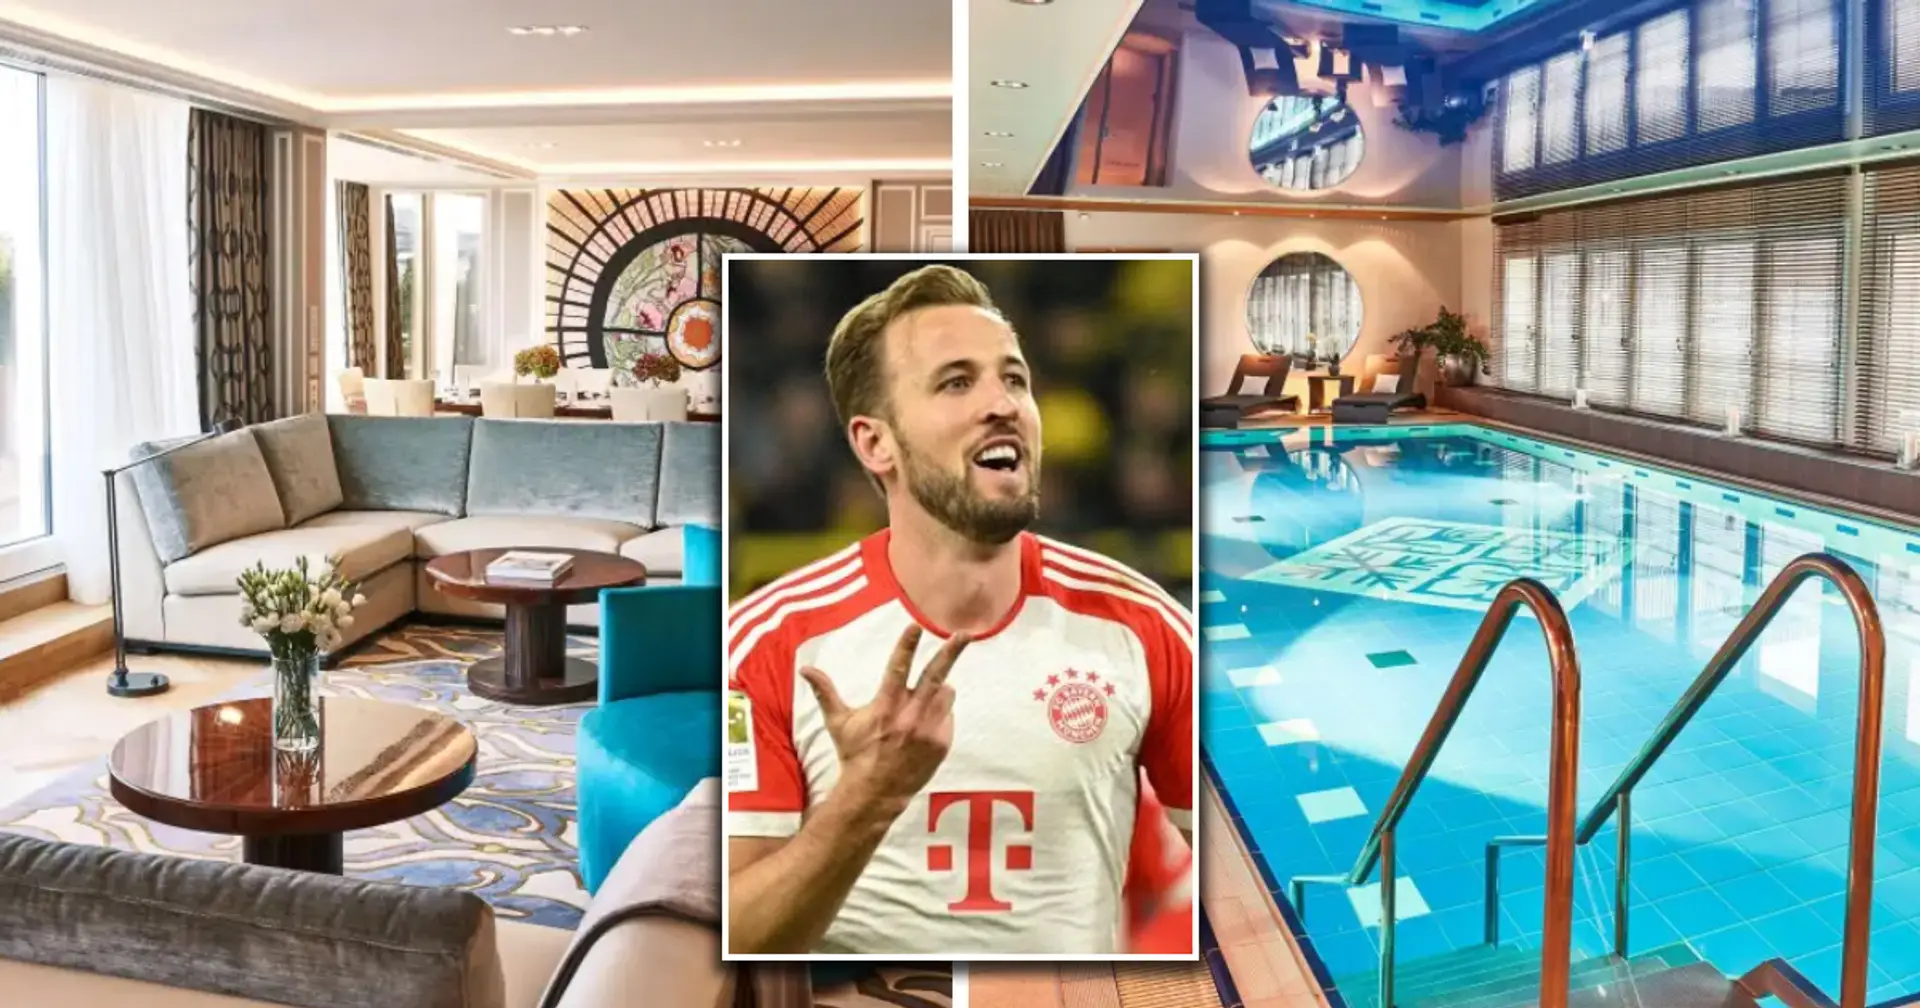 How much money Harry Kane has already spent on living in the hotel in Munich